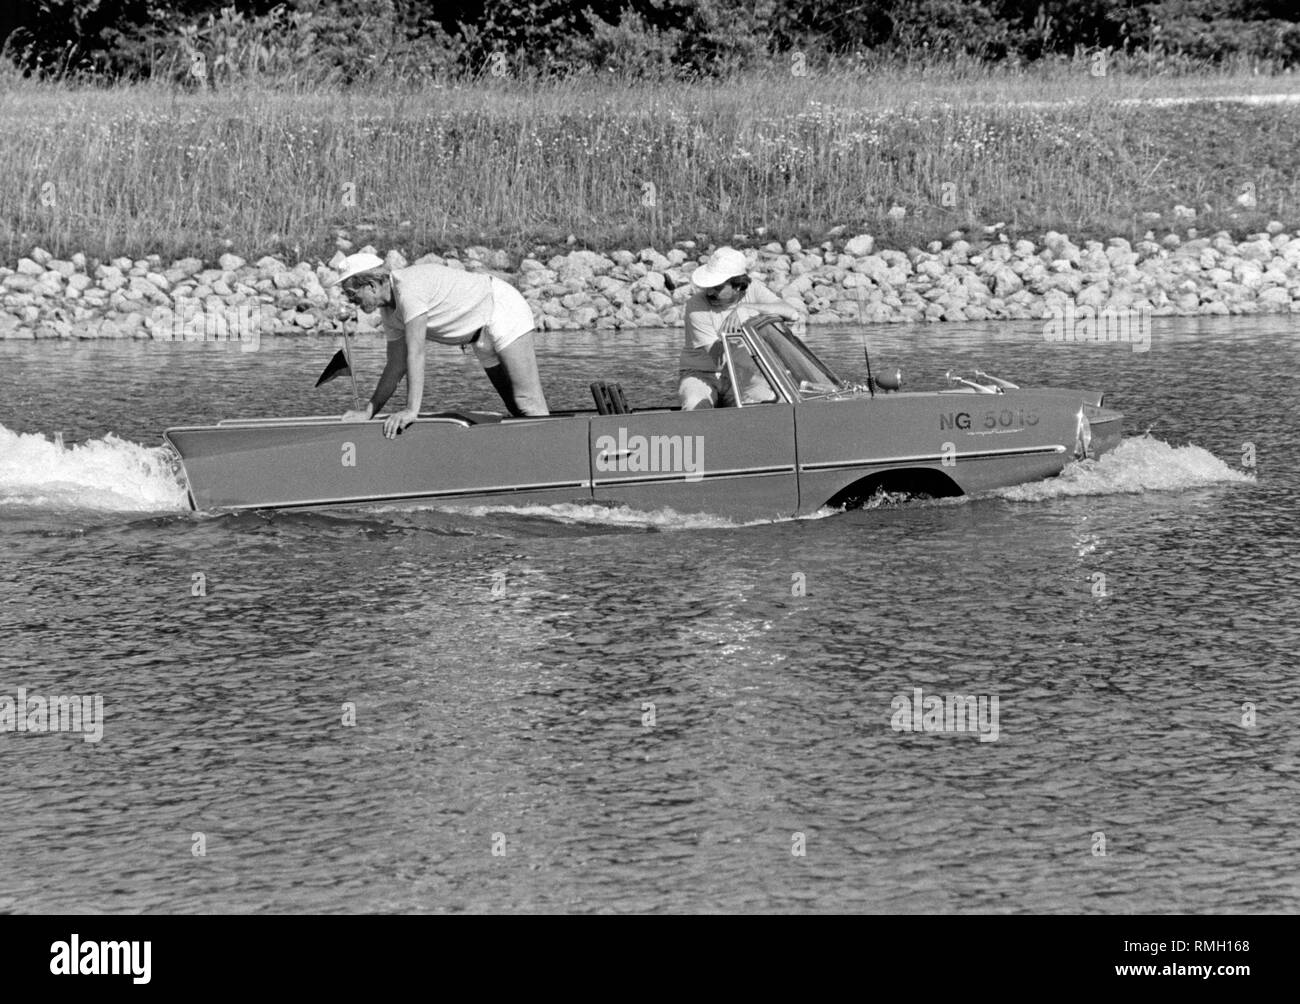 An Amphicar 770 drives on a body of water. The Amphicar, designed by Hans Trippel, was a four-seater amphibious vehicle, of which there were about 4000 pieces produced. Stock Photo